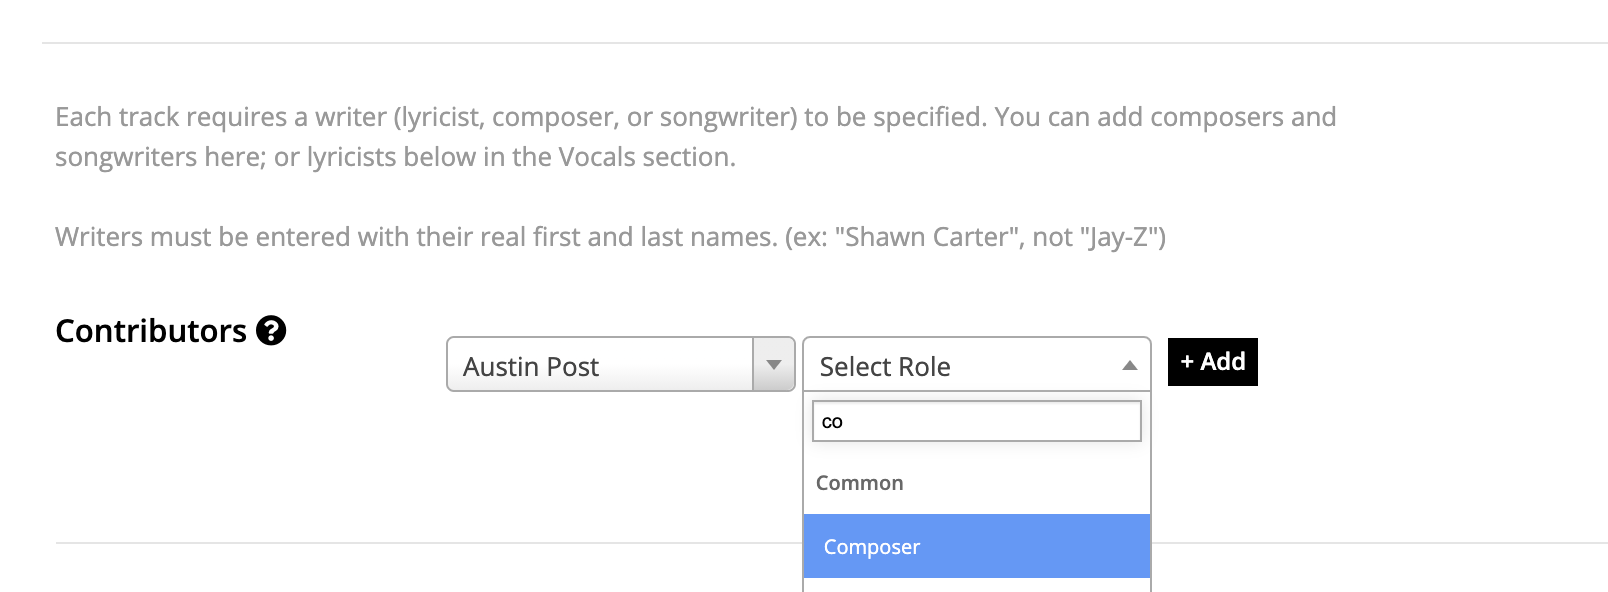 Austin_post_being_added_as_composer.png